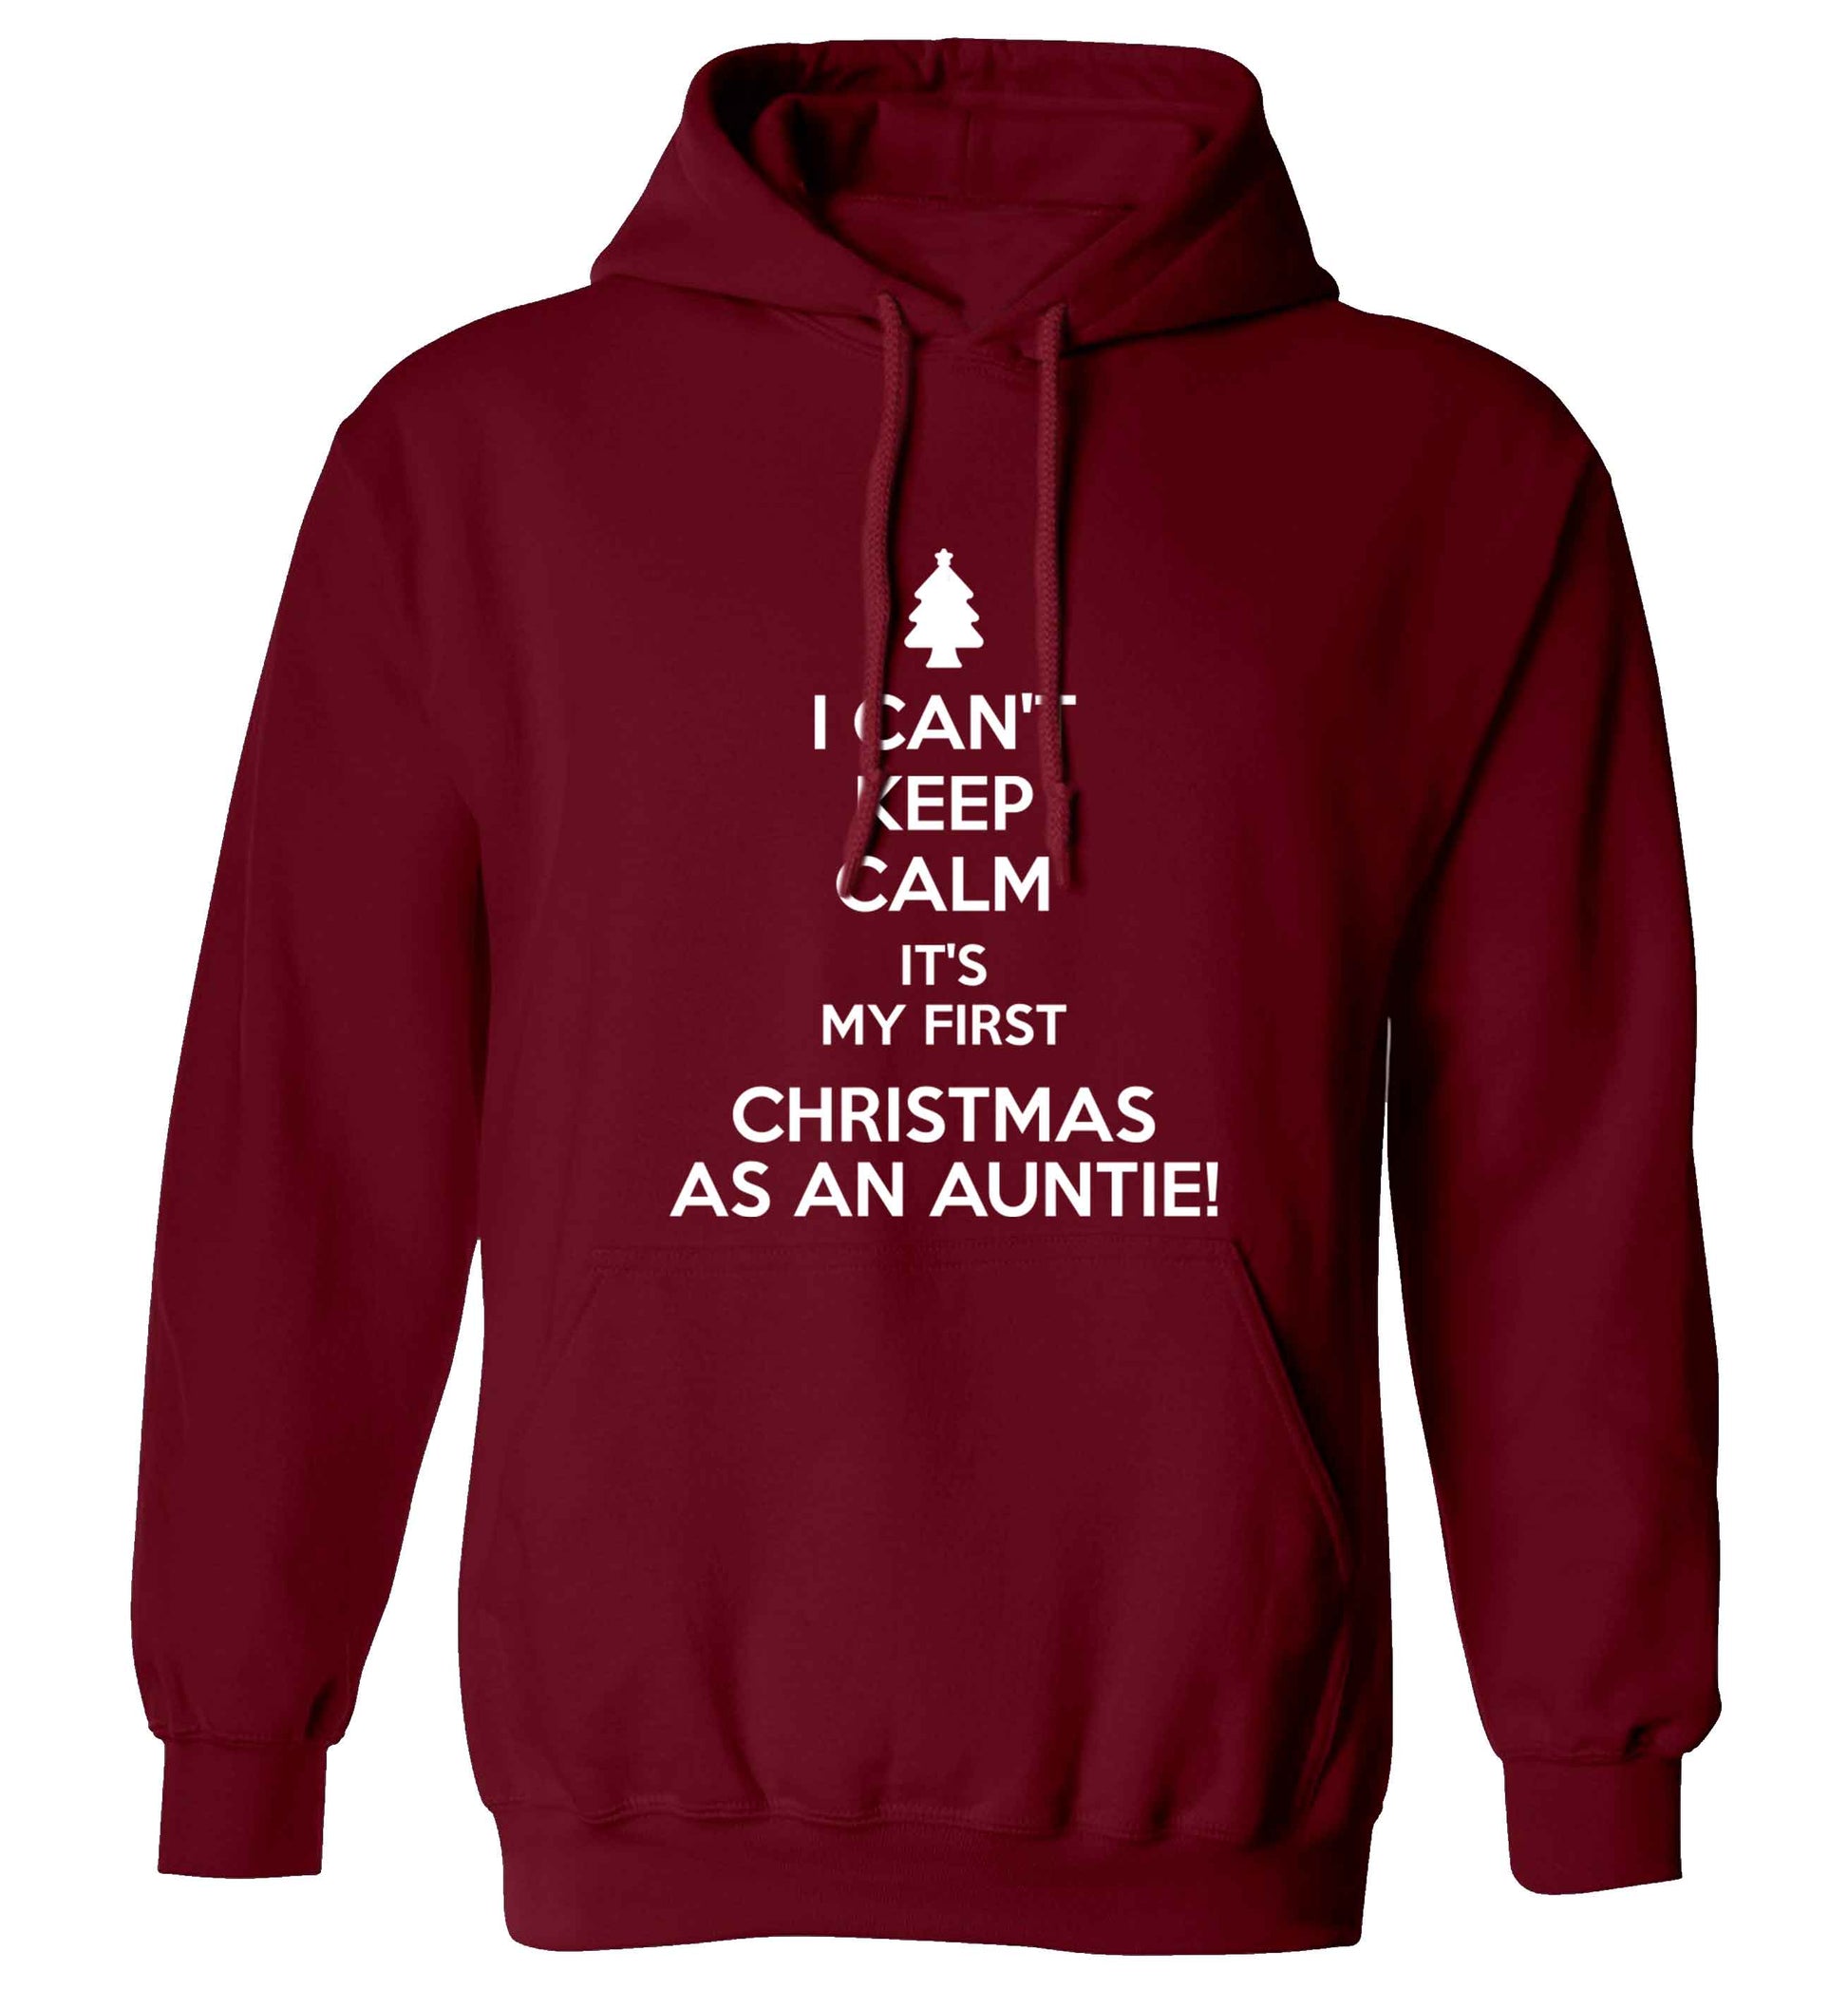 I can't keep calm it's my first Christmas as an auntie! adults unisex maroon hoodie 2XL